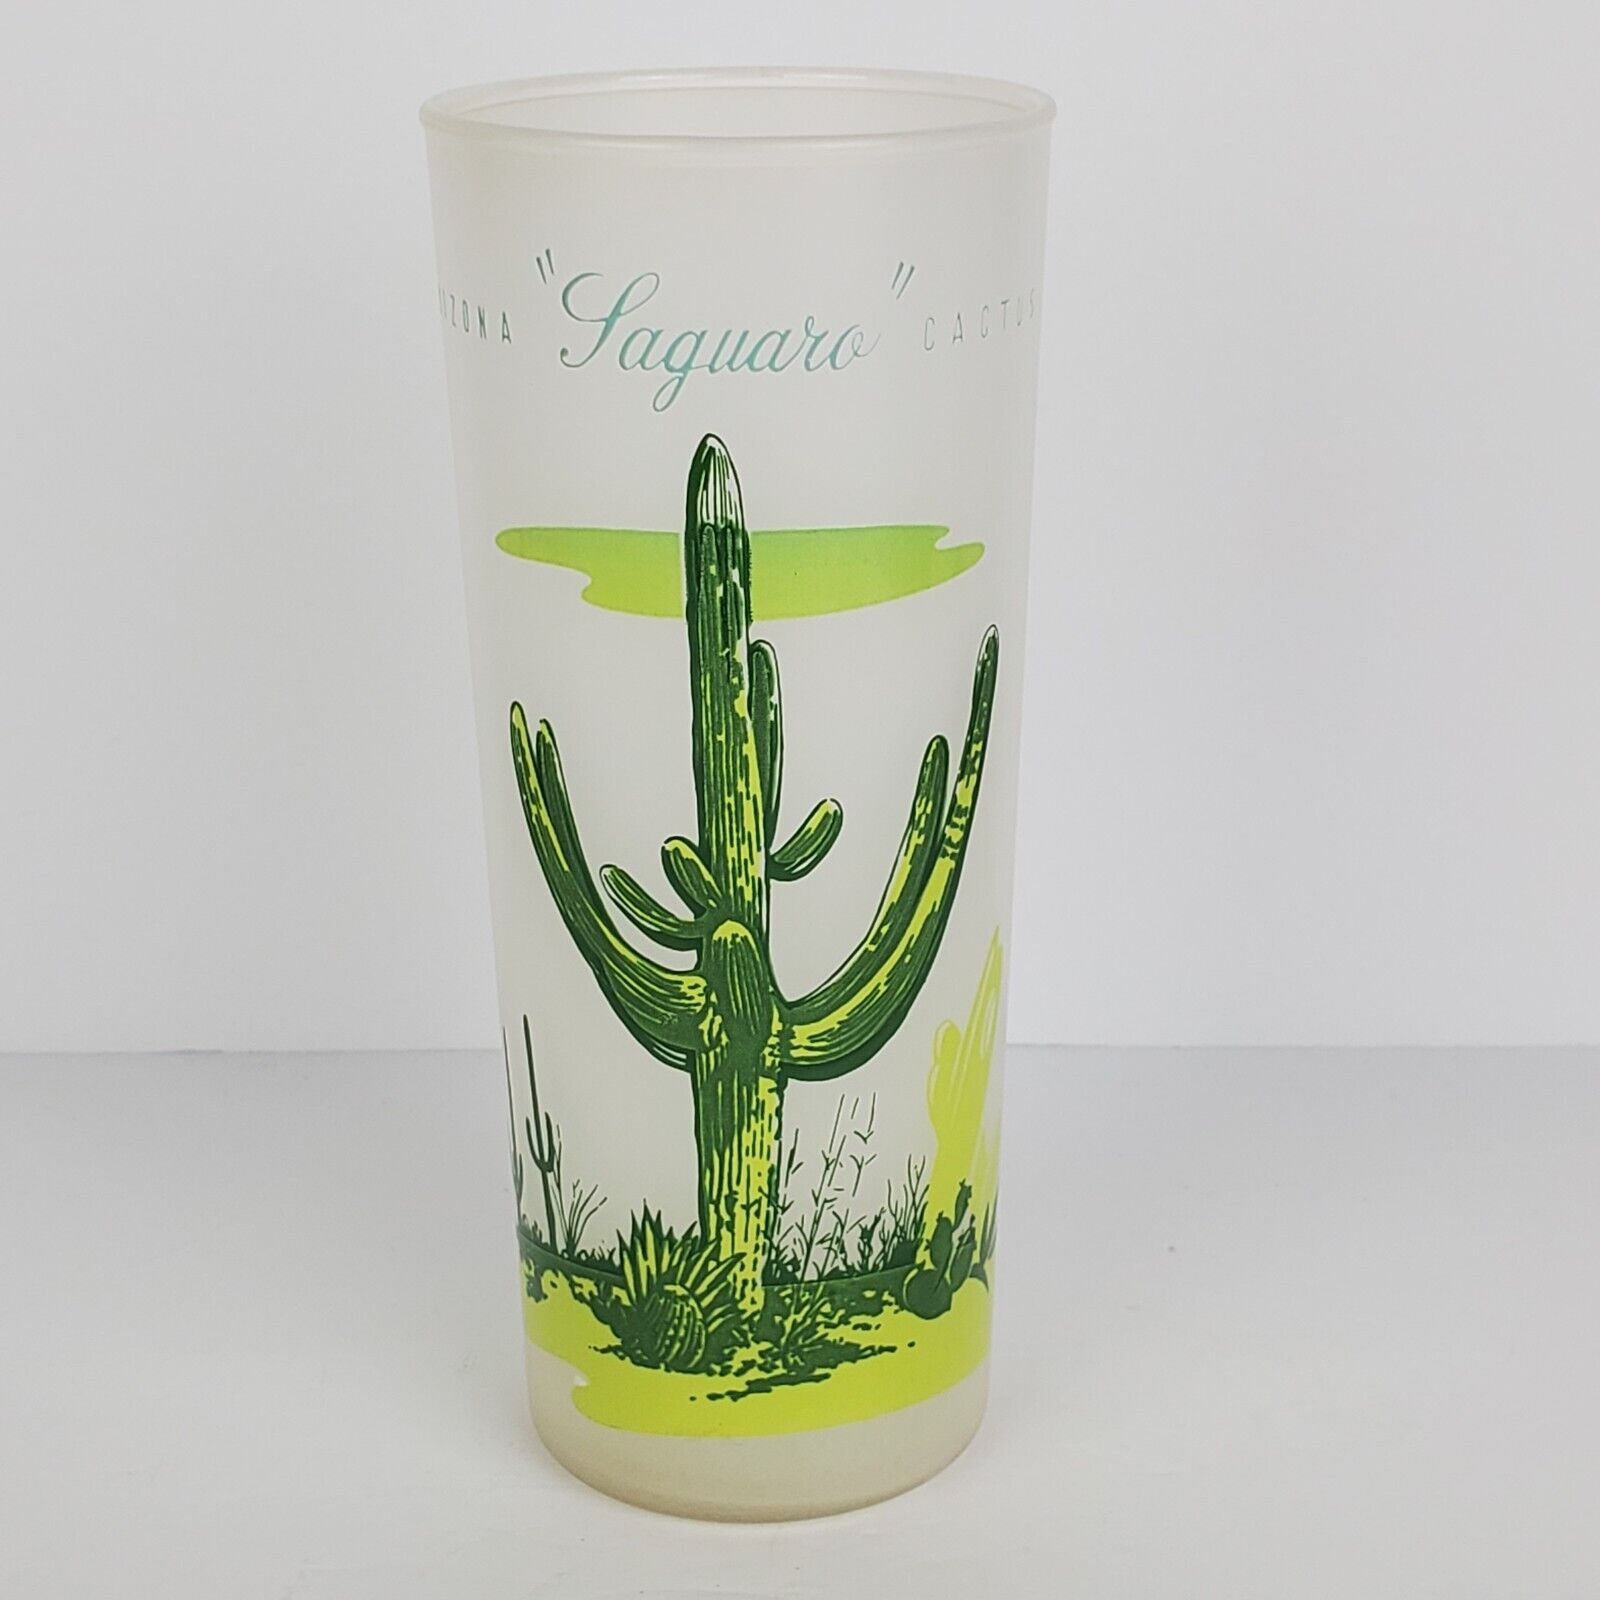 Vintage Blakely Oil & Gas Arizona Laguaro Cactus Tall Frosted Tom Collins Glass